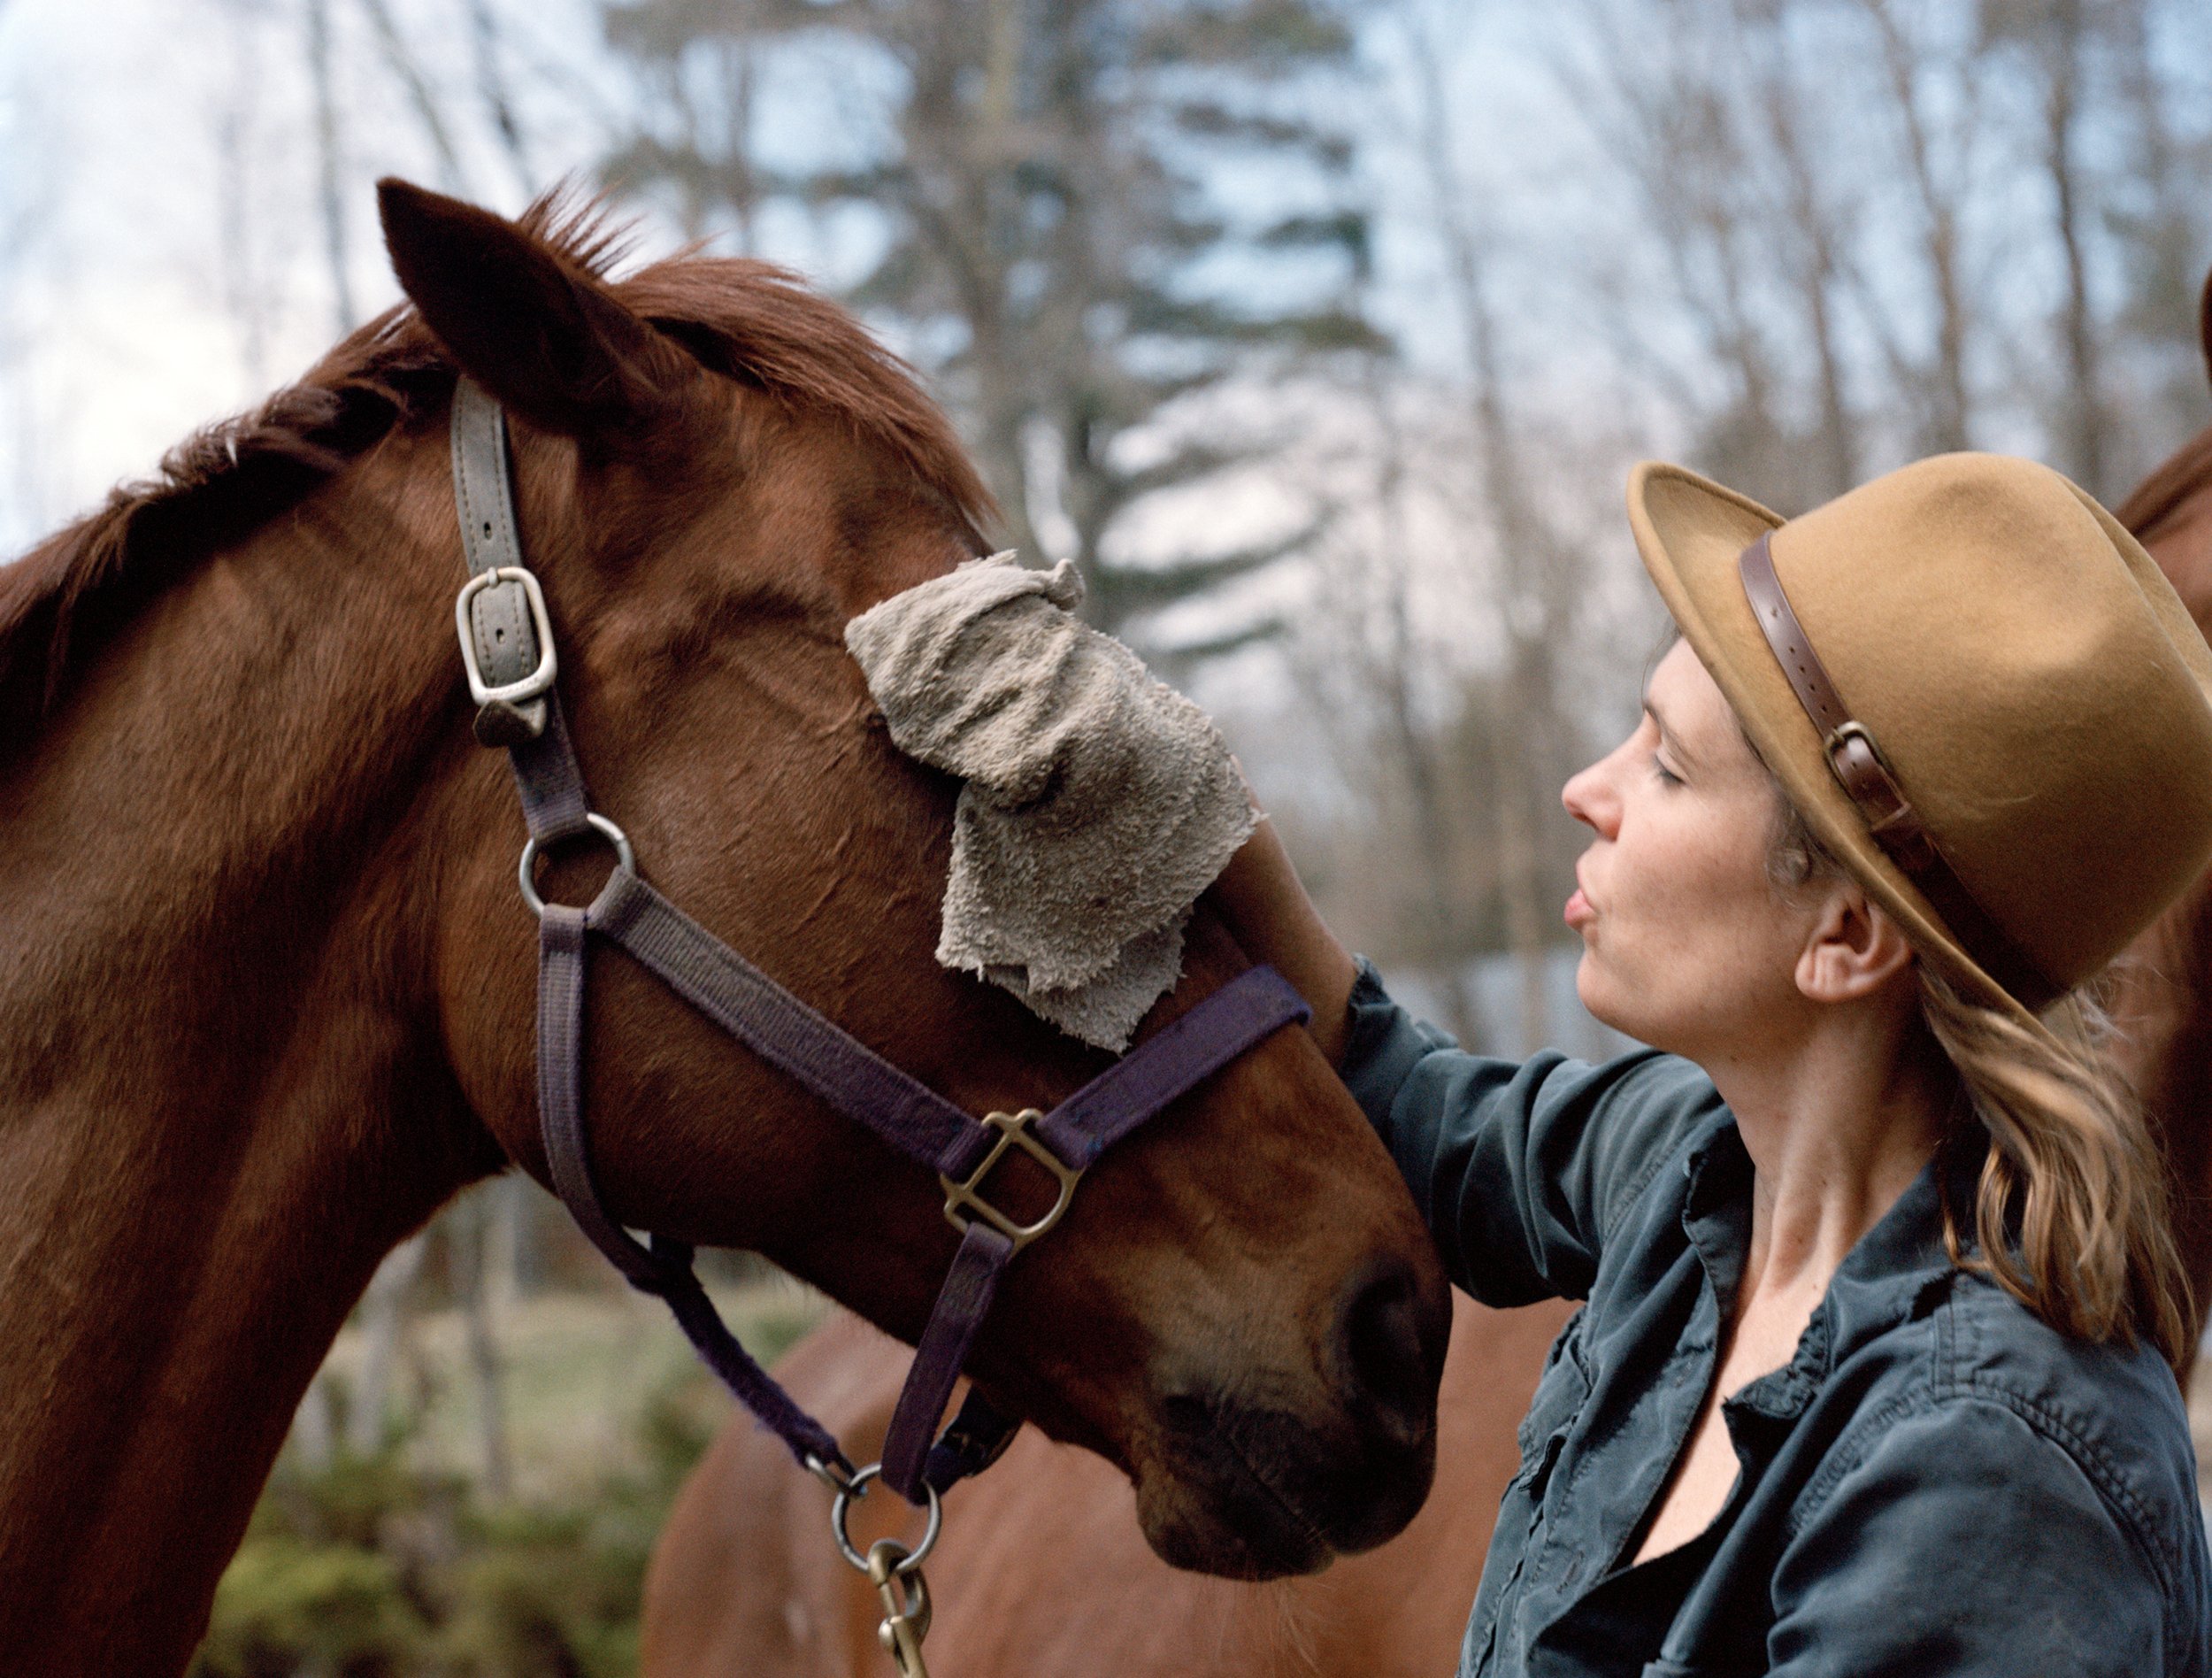  "I Saved an Abused, Broken Horse. Or Did She Save Me?," Courtney Maum, The Guardian, April 2022 